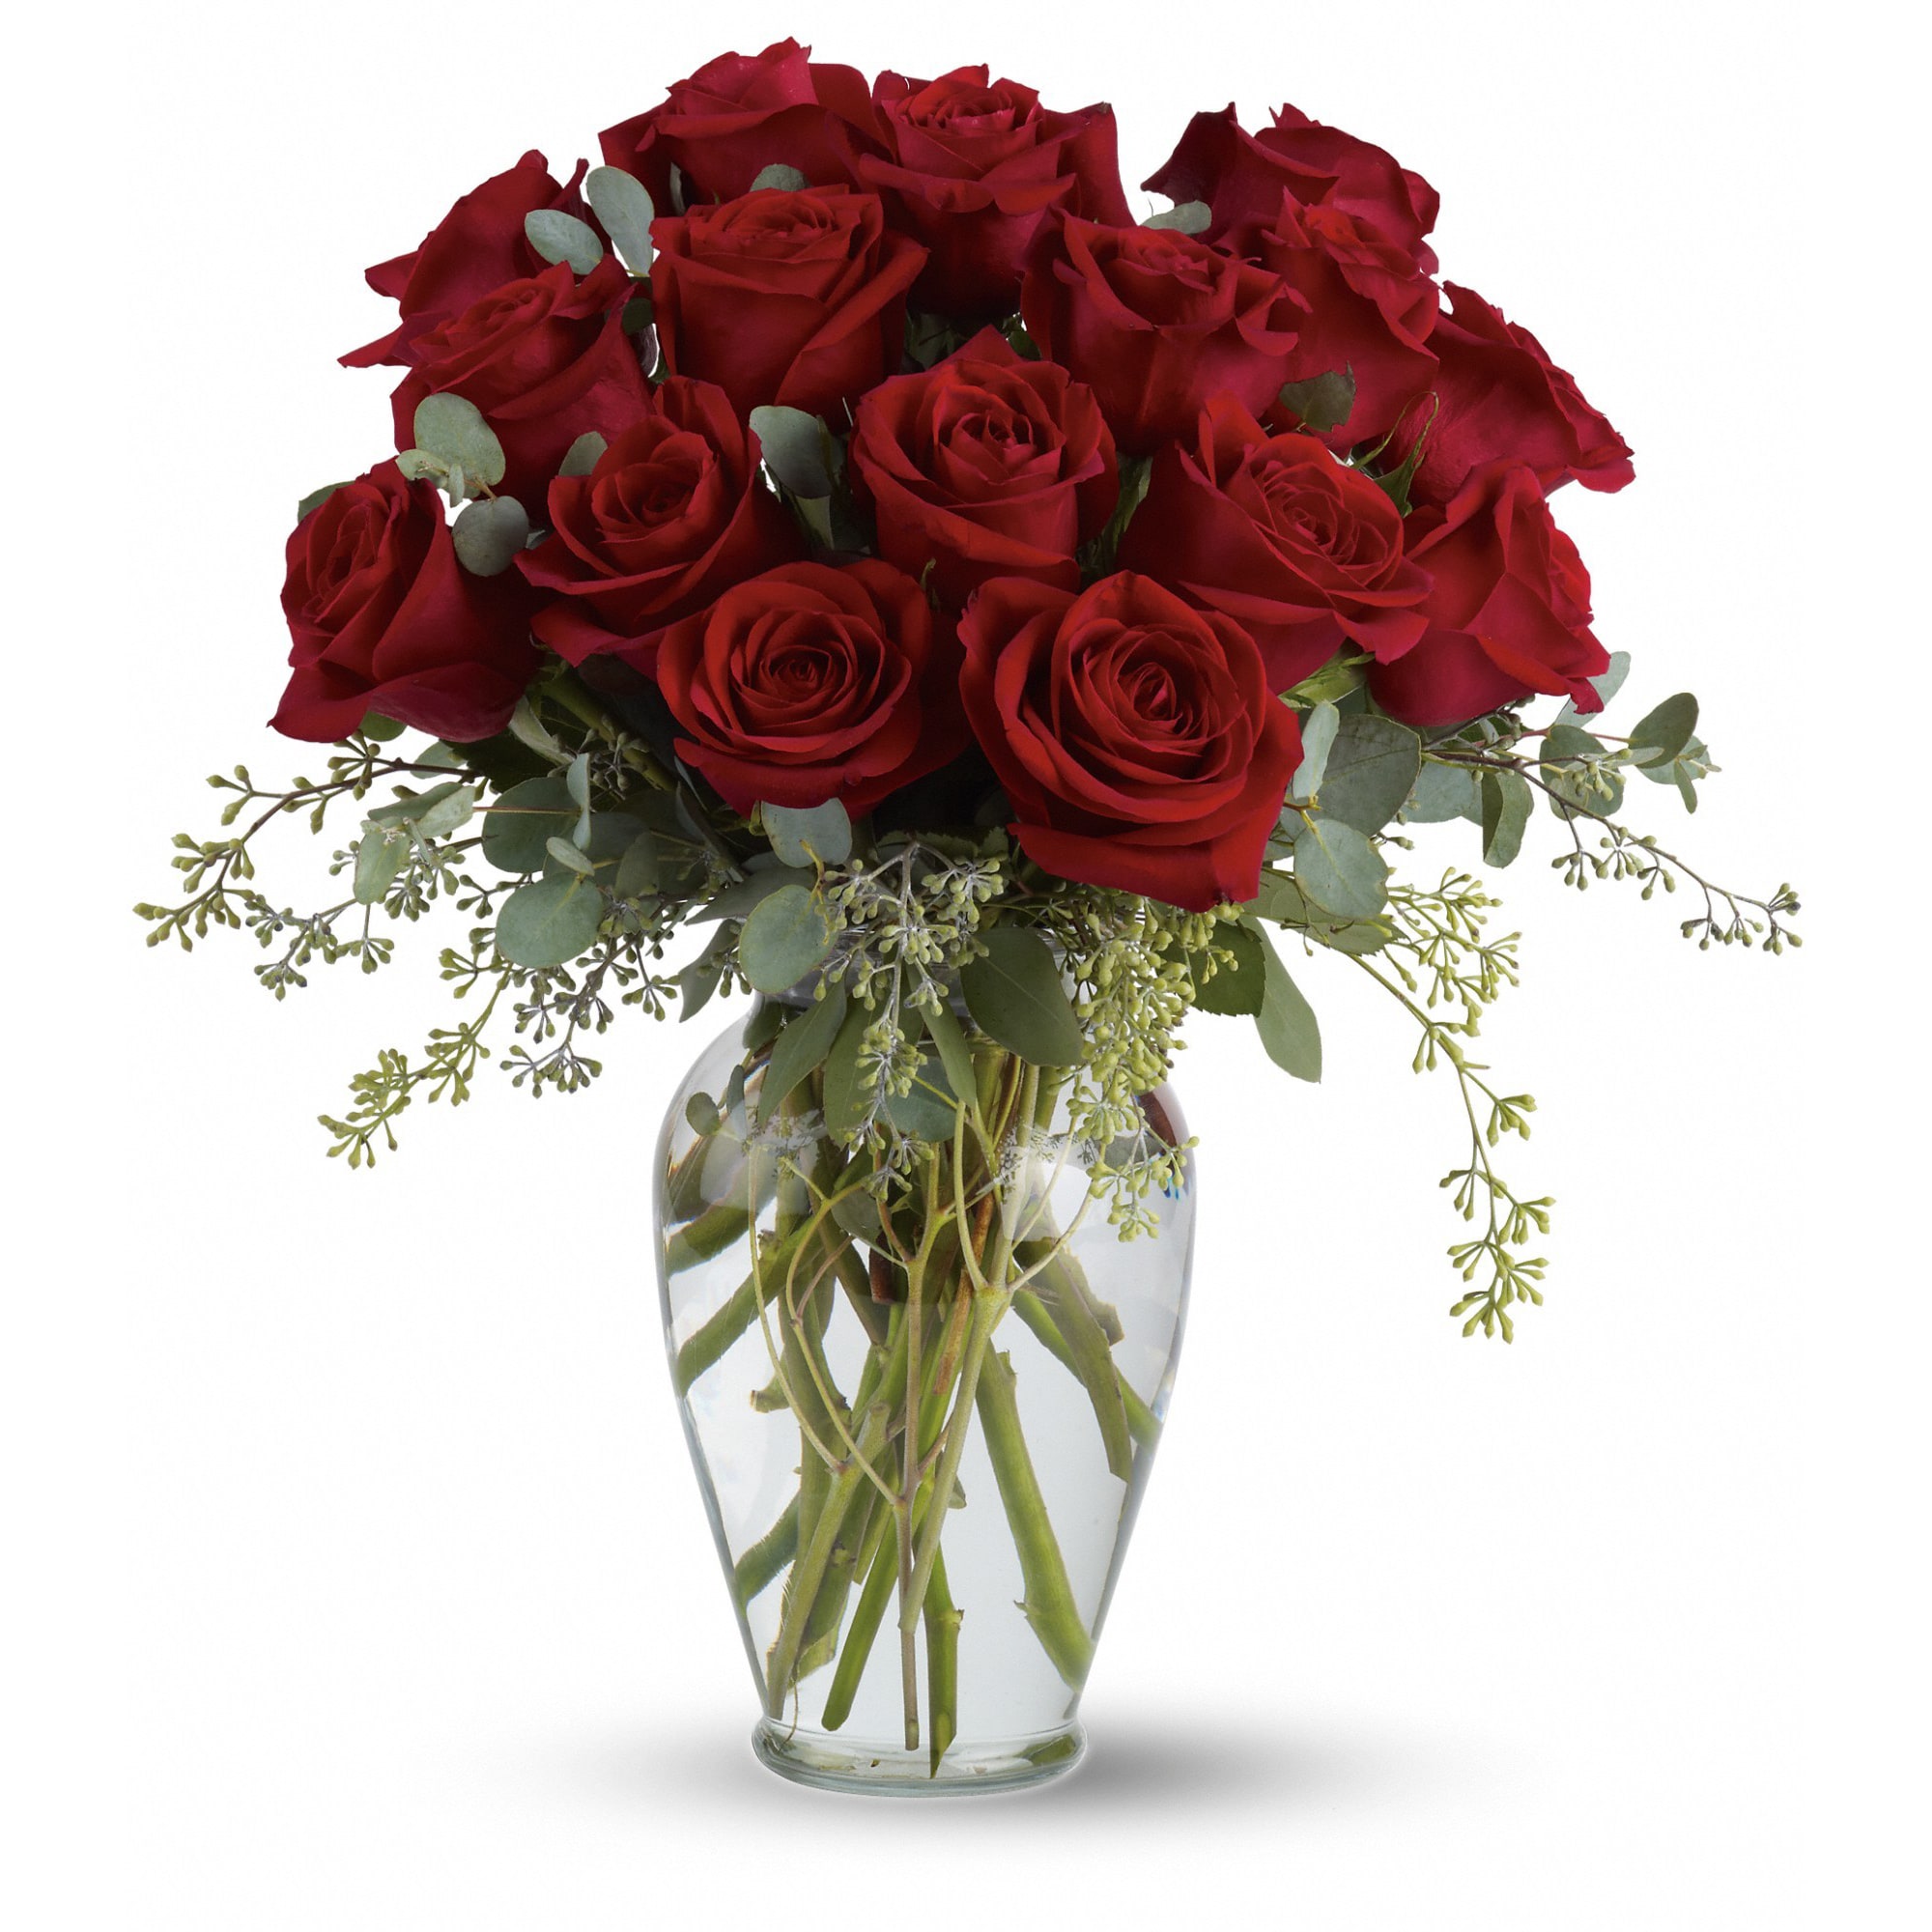 Full Heart - 16 Premium Red Roses by Teleflora - When your heart is full of love. Of longing. Of loss. You can pay tribute with this incredible arrangement of roses and eucalyptus in a beautiful ming vase. Cherish the moments you had and the memories you will hold onto forever.  Lovely red roses and graceful eucalyptus in a gorgeous ming vase make up this heartfelt gift.  Approximately 16&quot; W x 17&quot; H  Orientation: All-Around      As Shown : T255-3A  